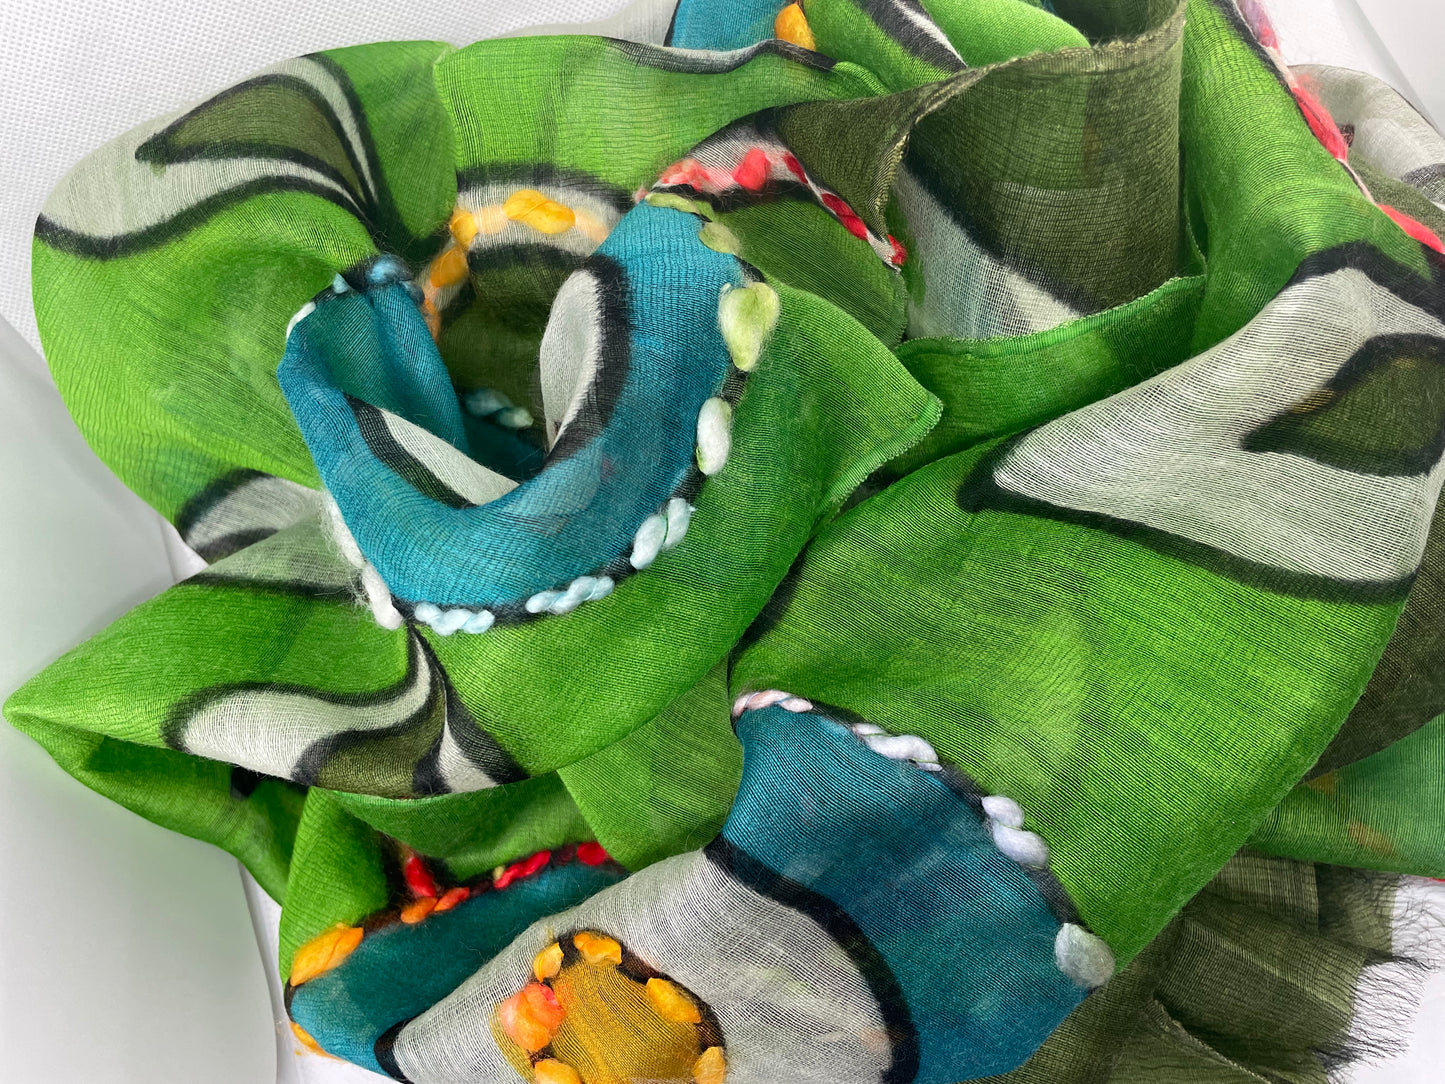 The Green Scarf - Hand Painted and Hand Embroidered